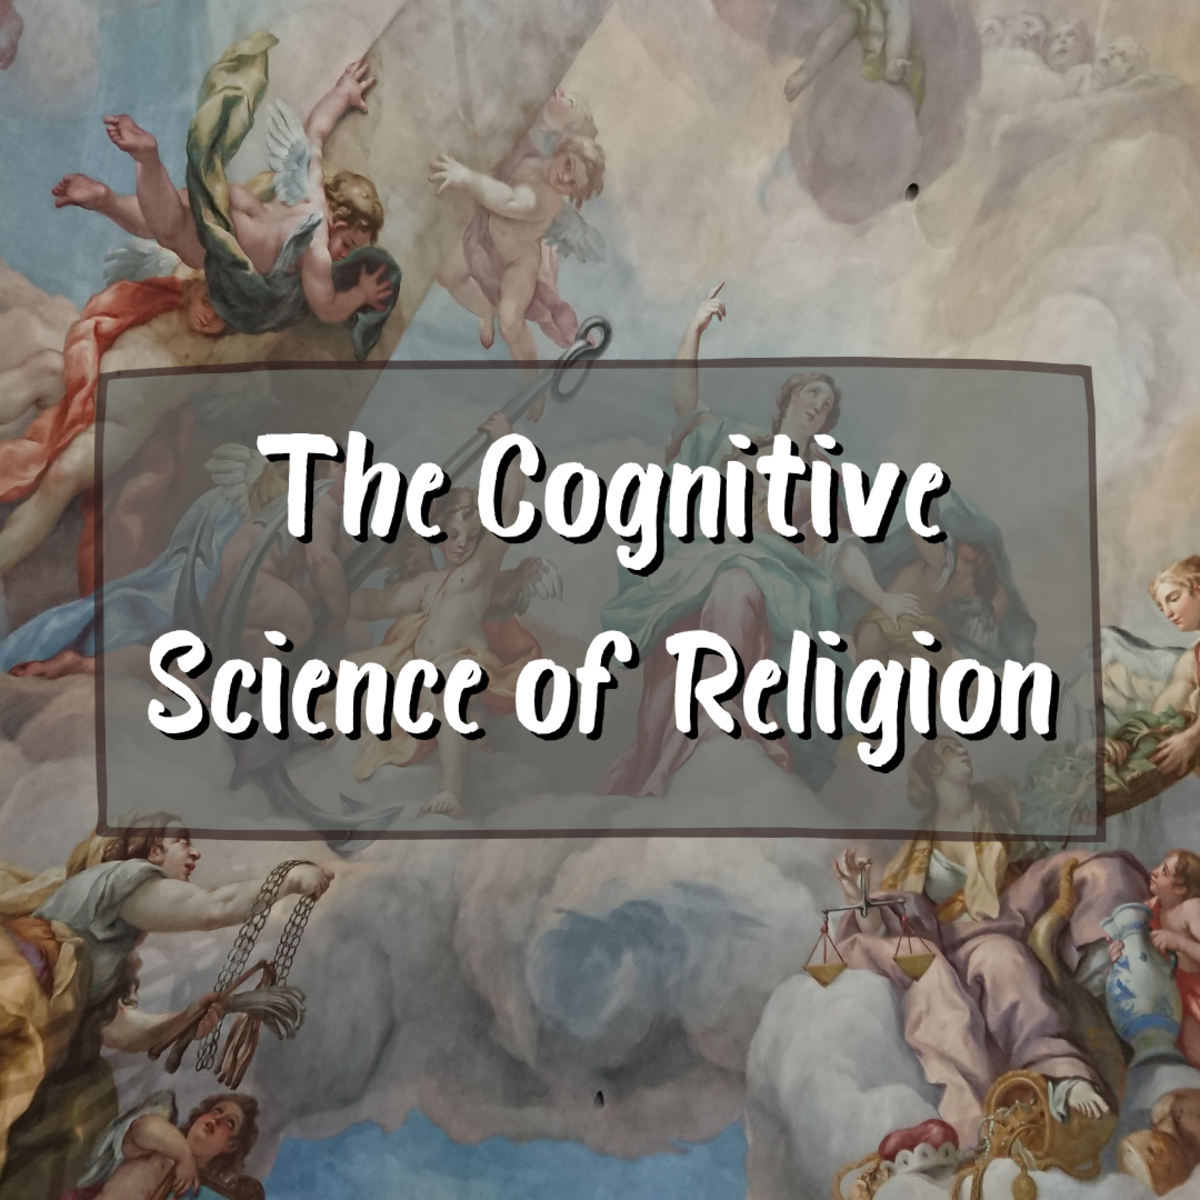 Learn about 13 important ways in which cognitive science has uncovered the psychological underpinnings of religion.